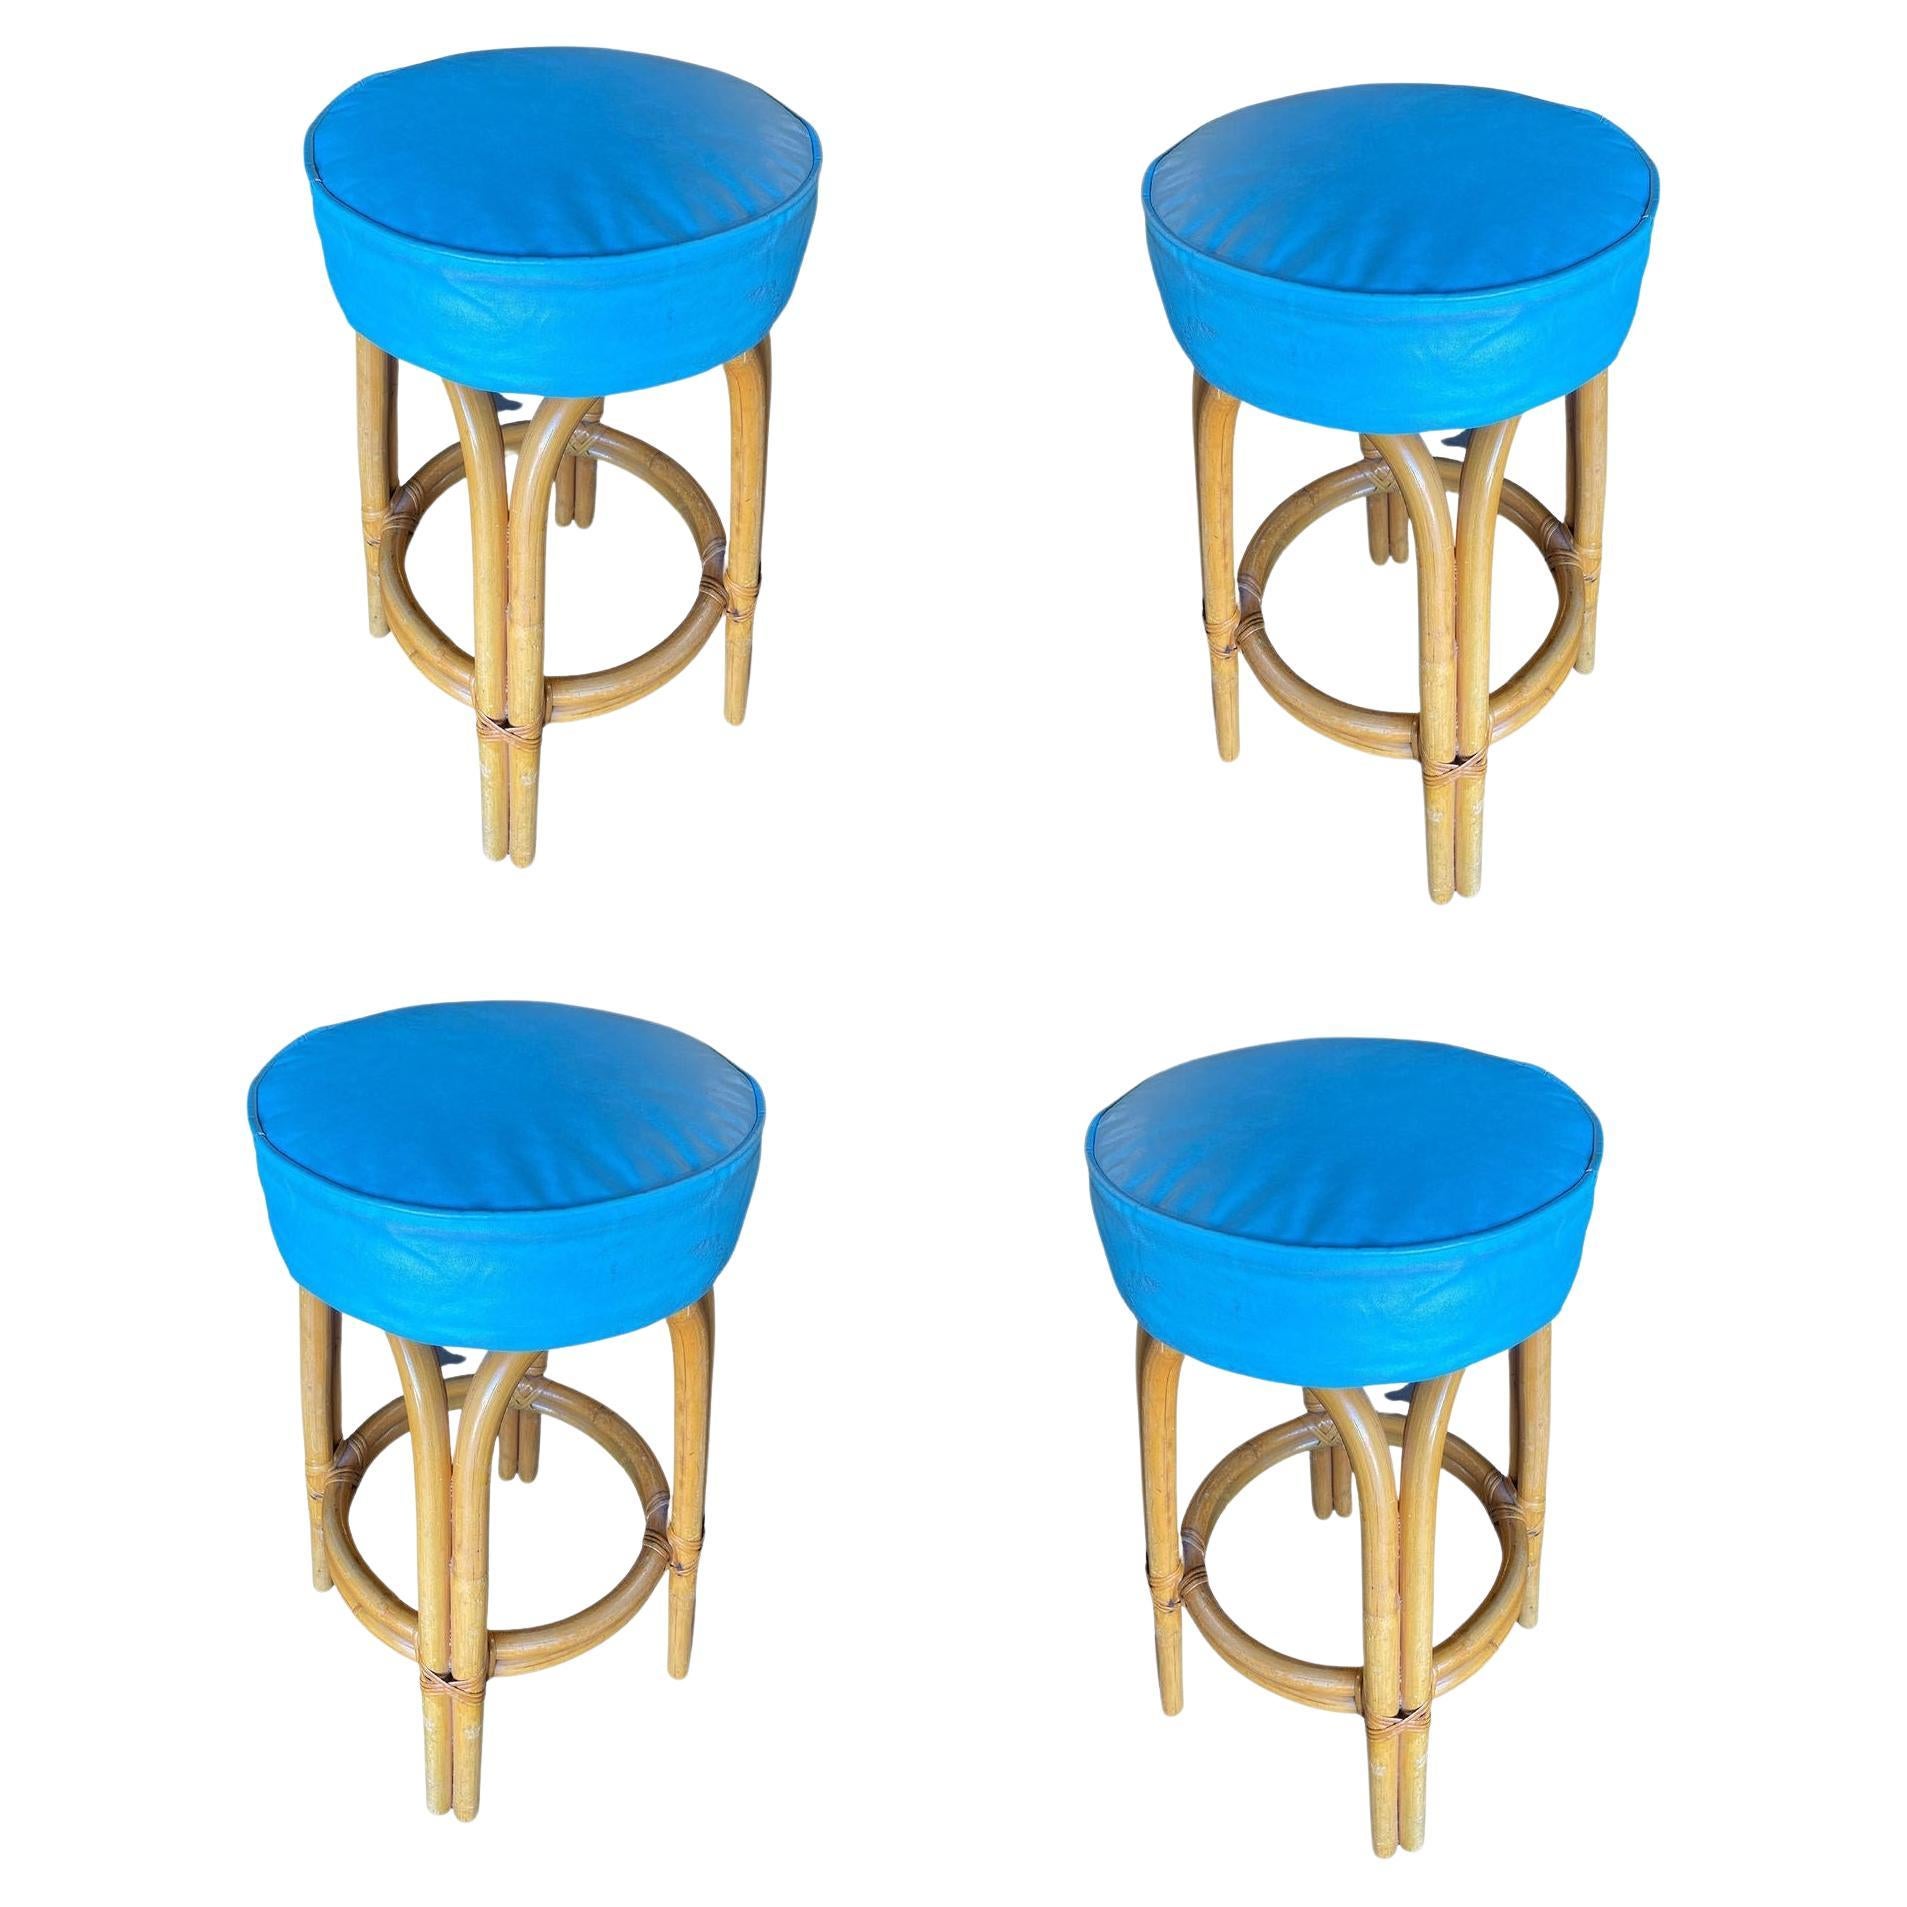 Restored Single Stand Arched Rattan Bar Stool w/ Teal Green Seat, Set of Four